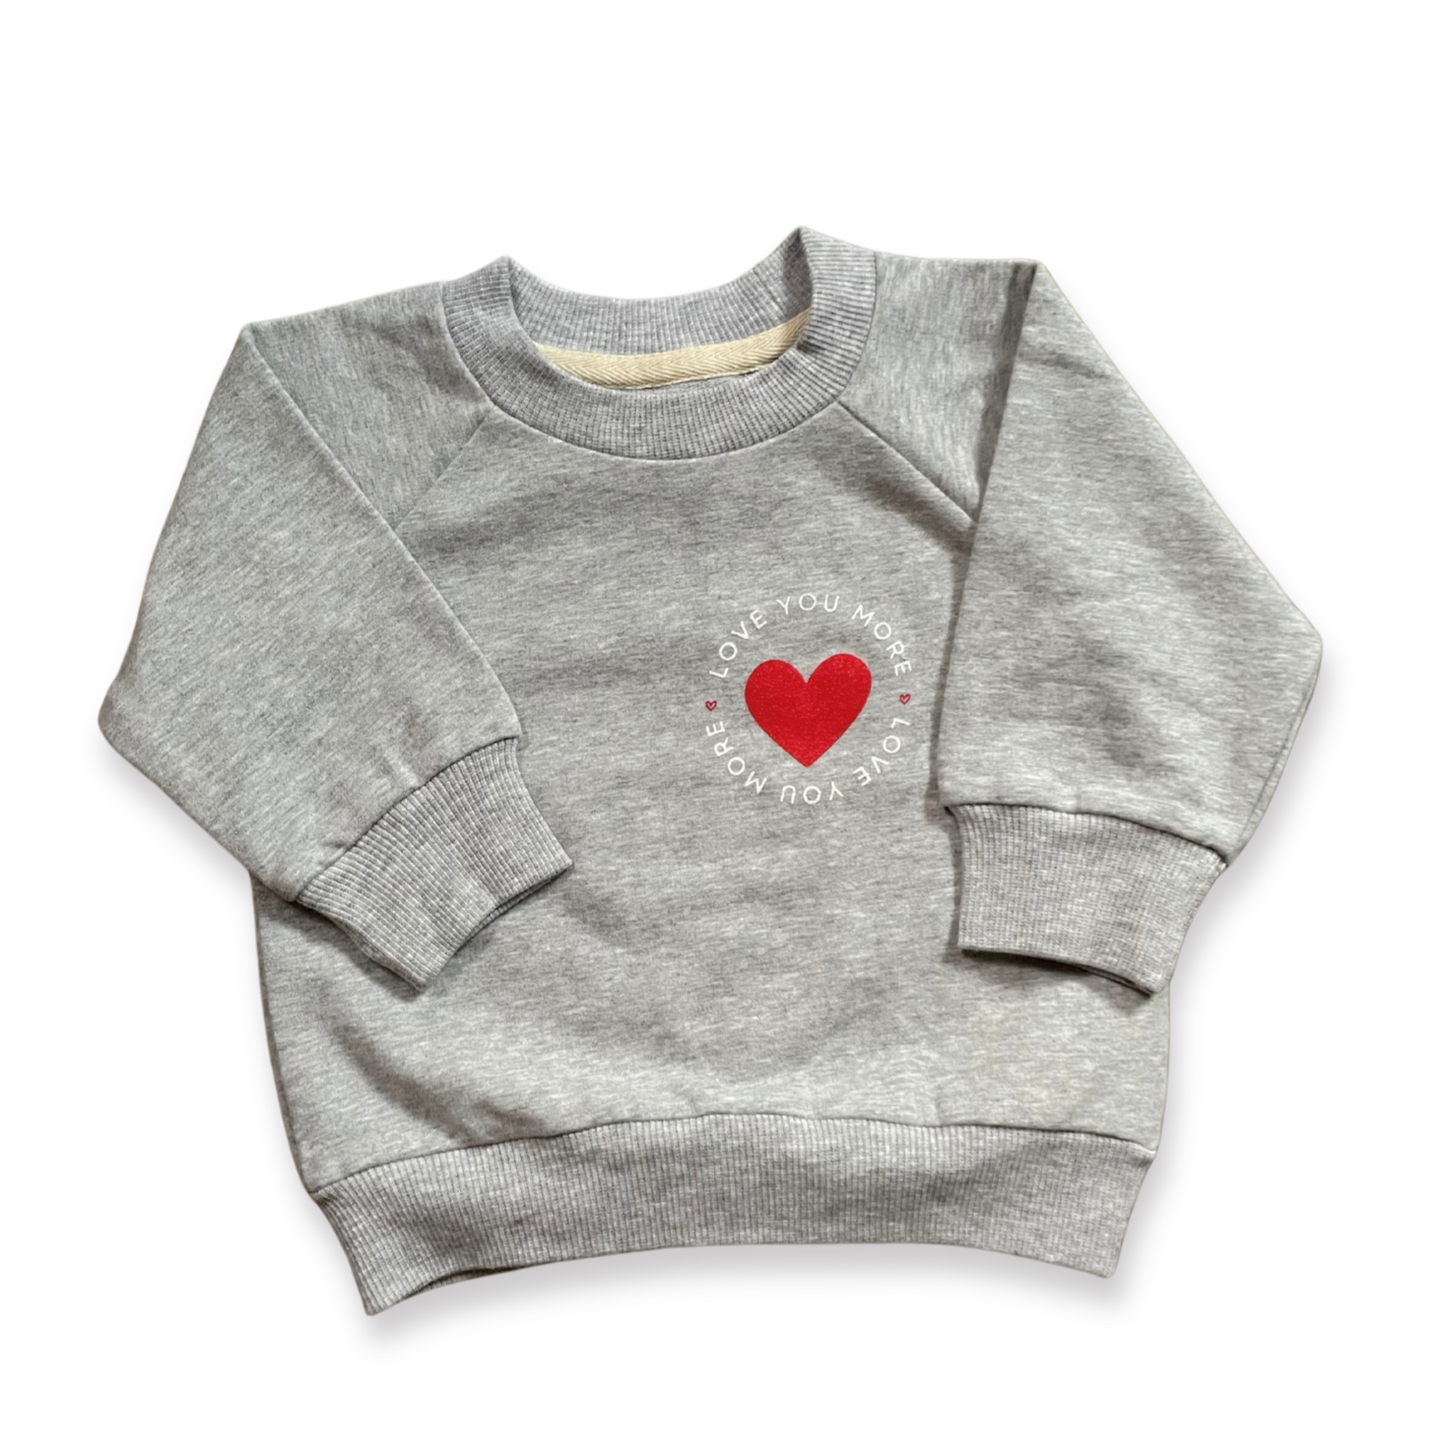 Two-Piece "Love You More" Organic Sweatsuit - Gray